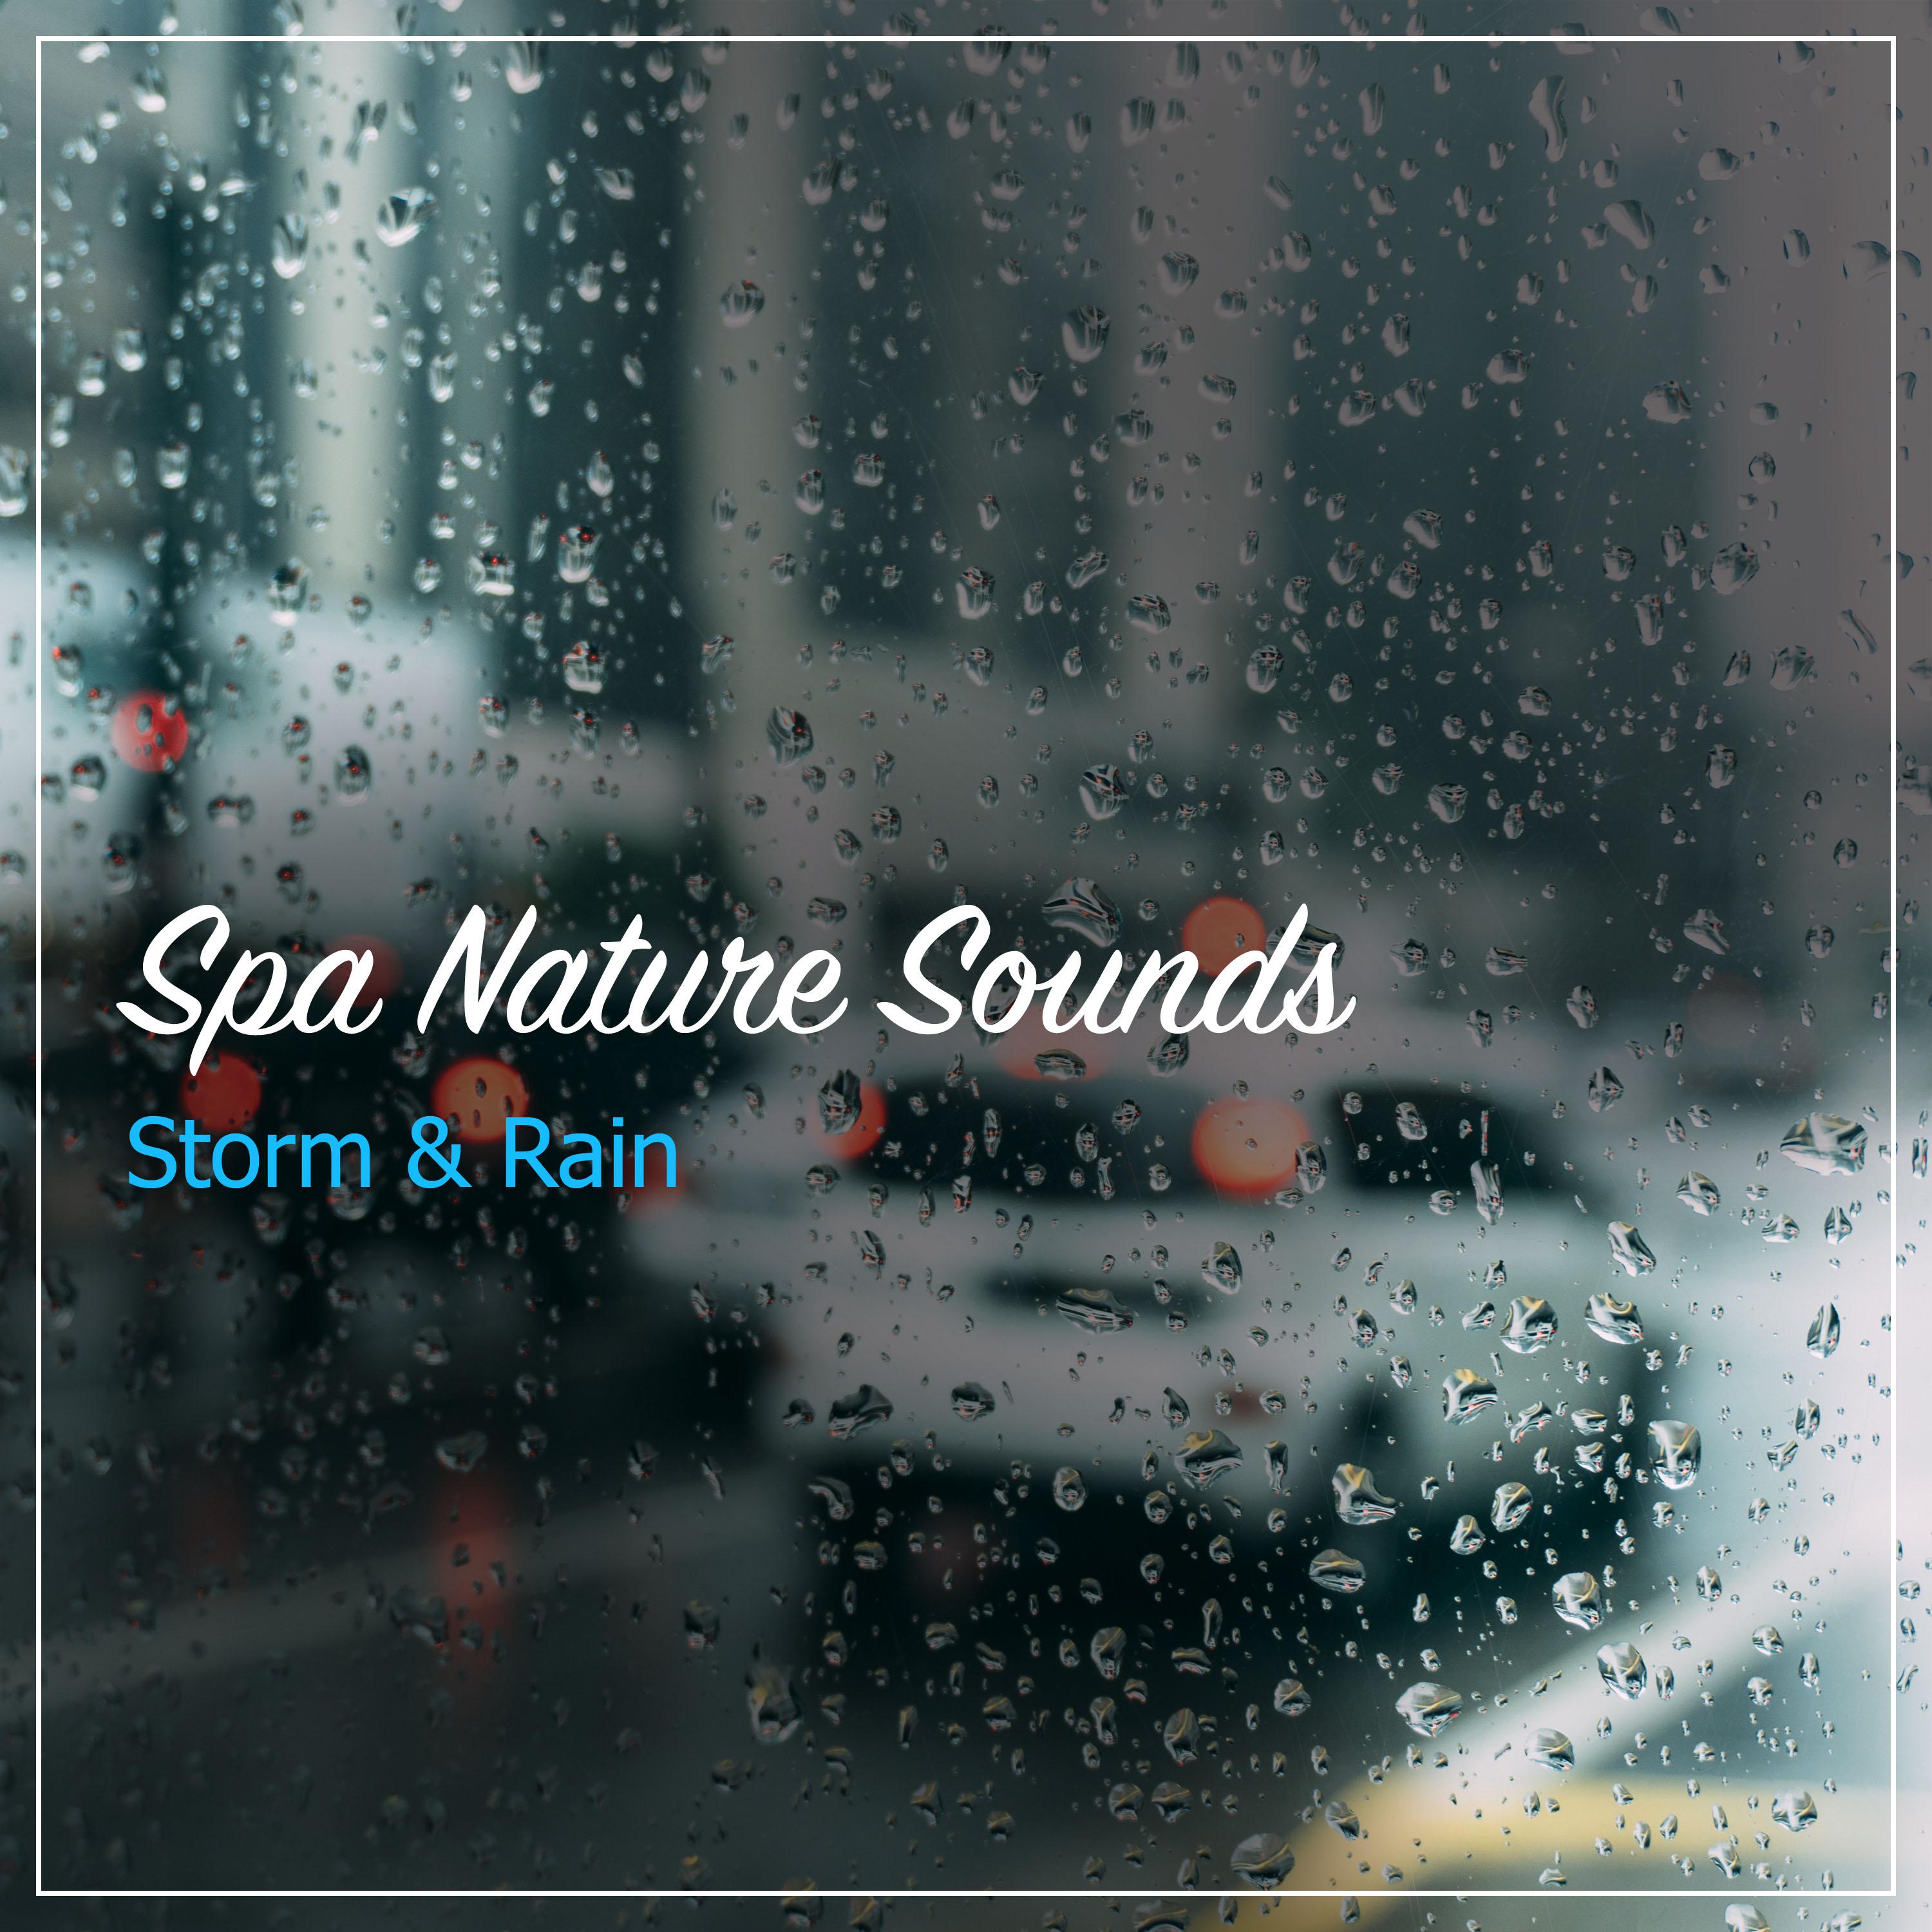 15 Meditation and Spa Nature Sounds, Loopable Storm and Rain Sounds